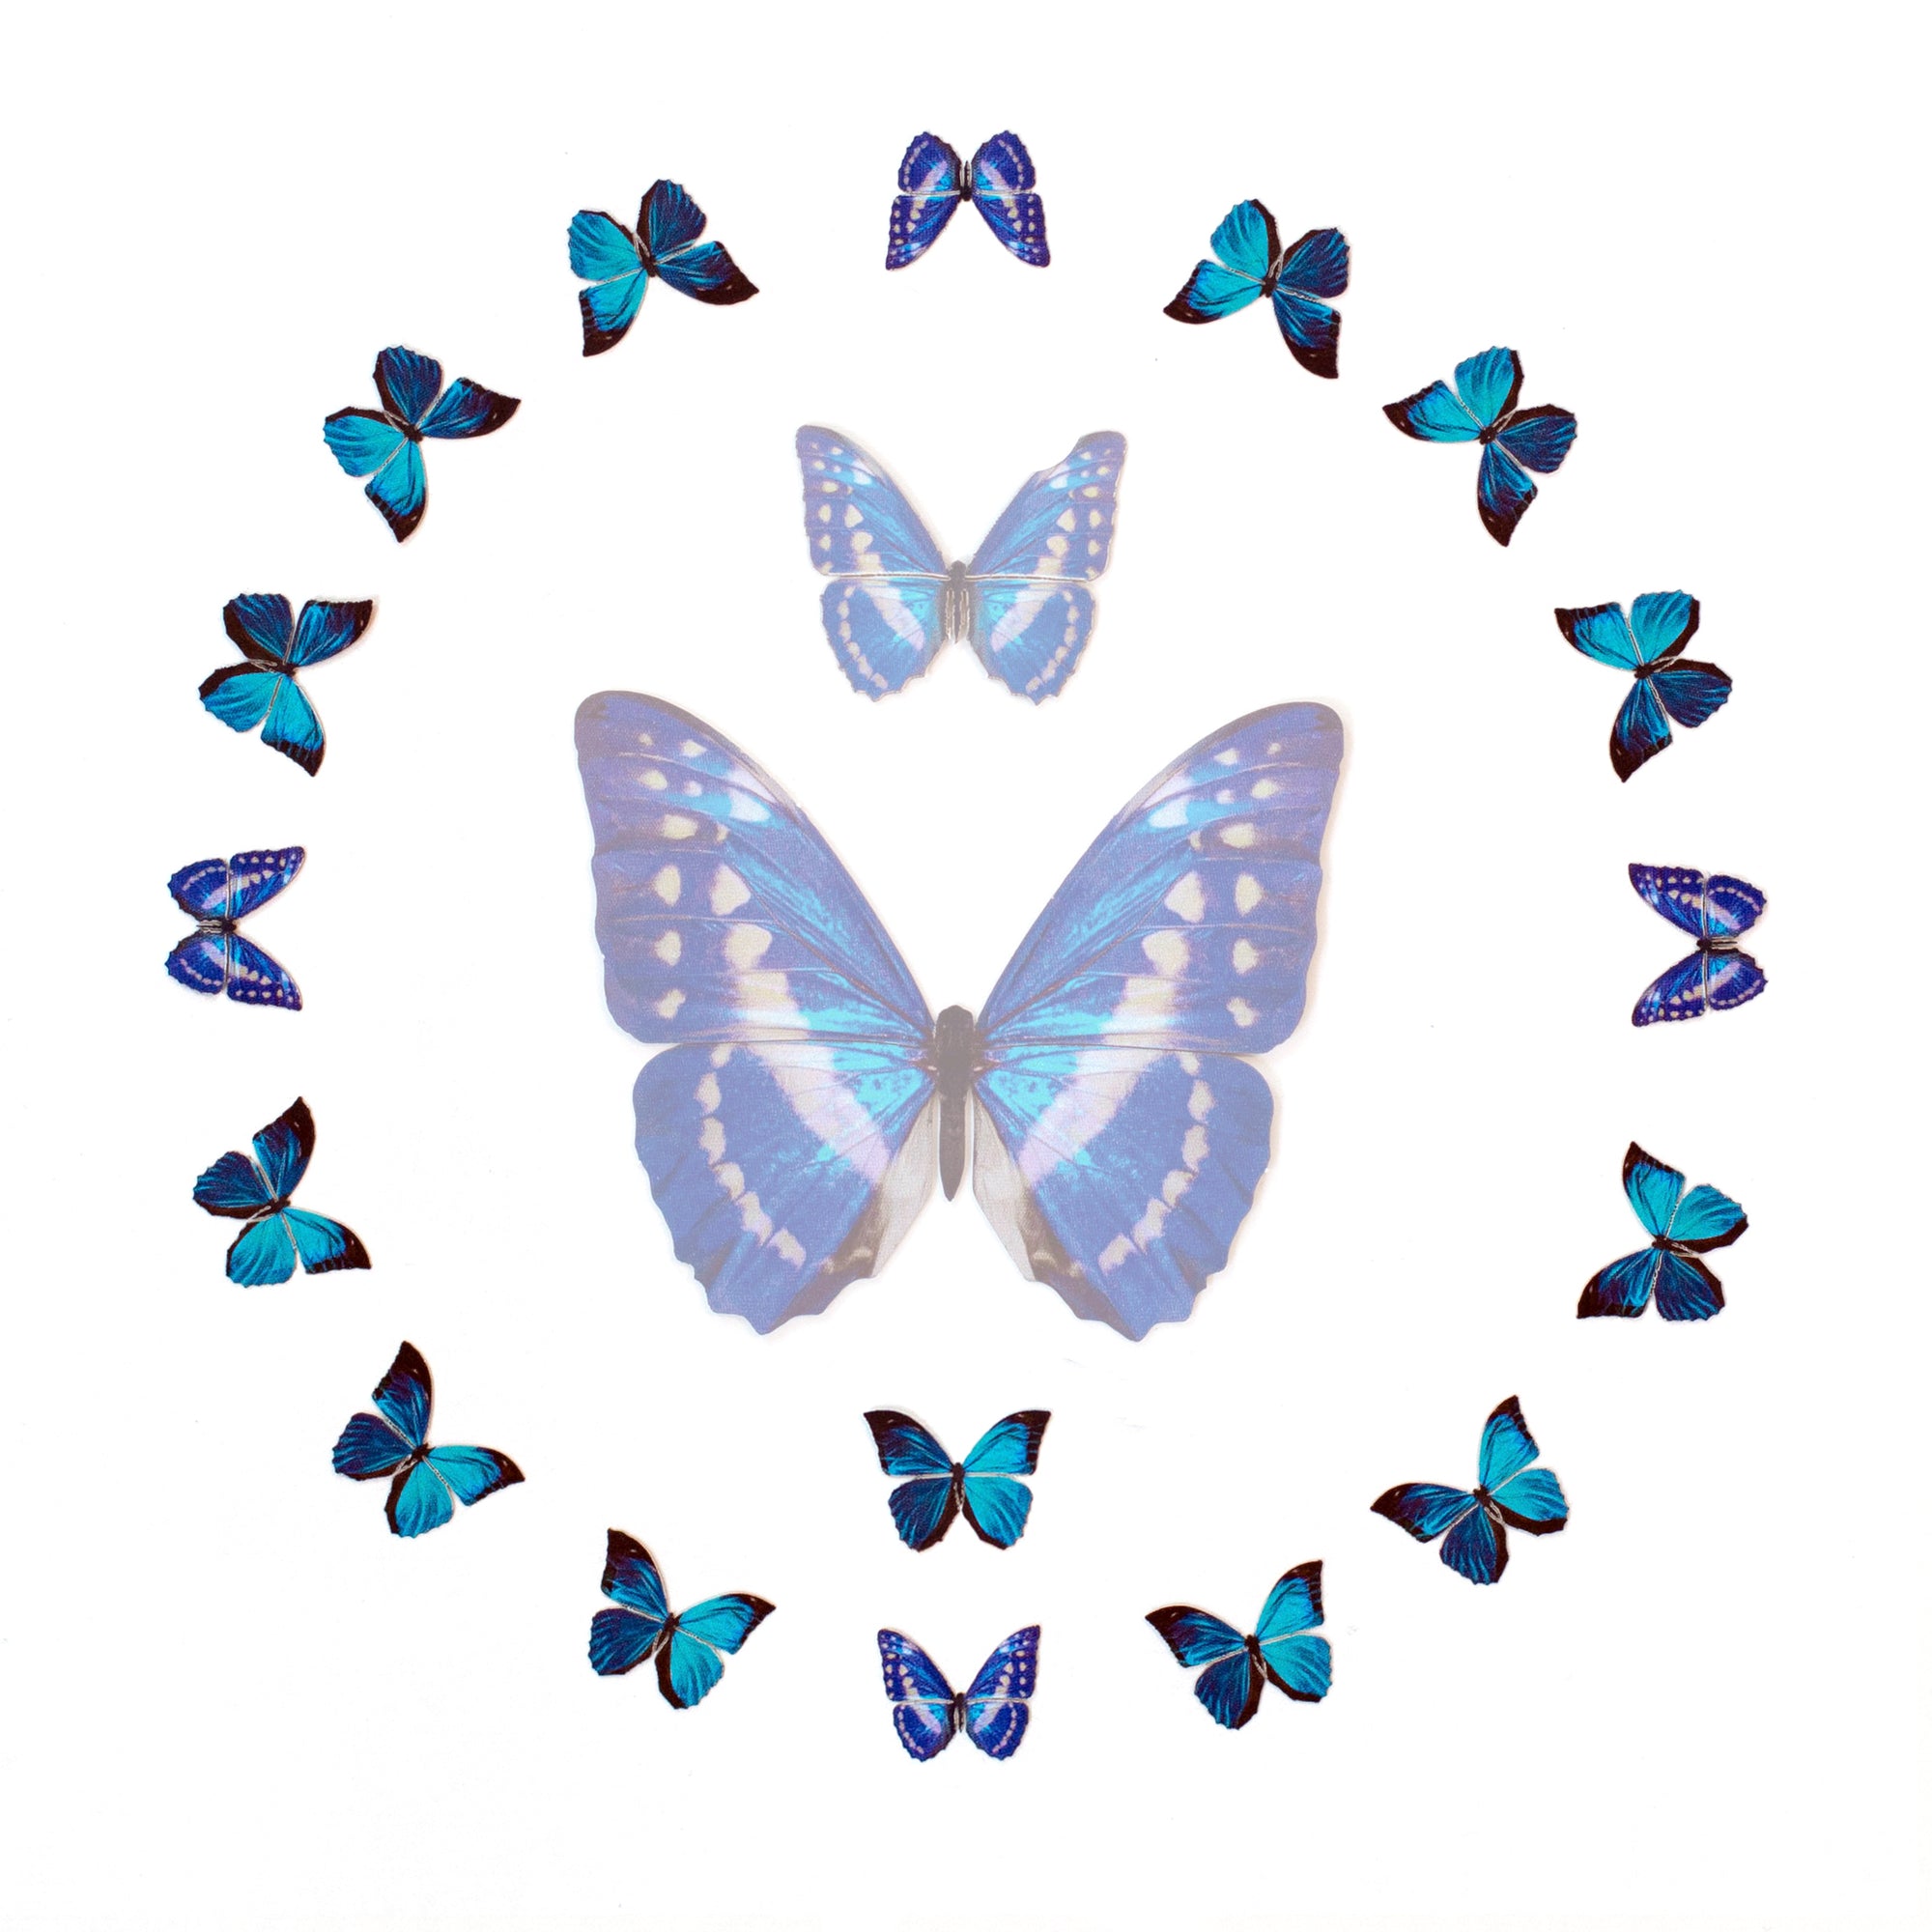 'Cerulean' Micro Morpho Butterfly Collection - Artist Discount